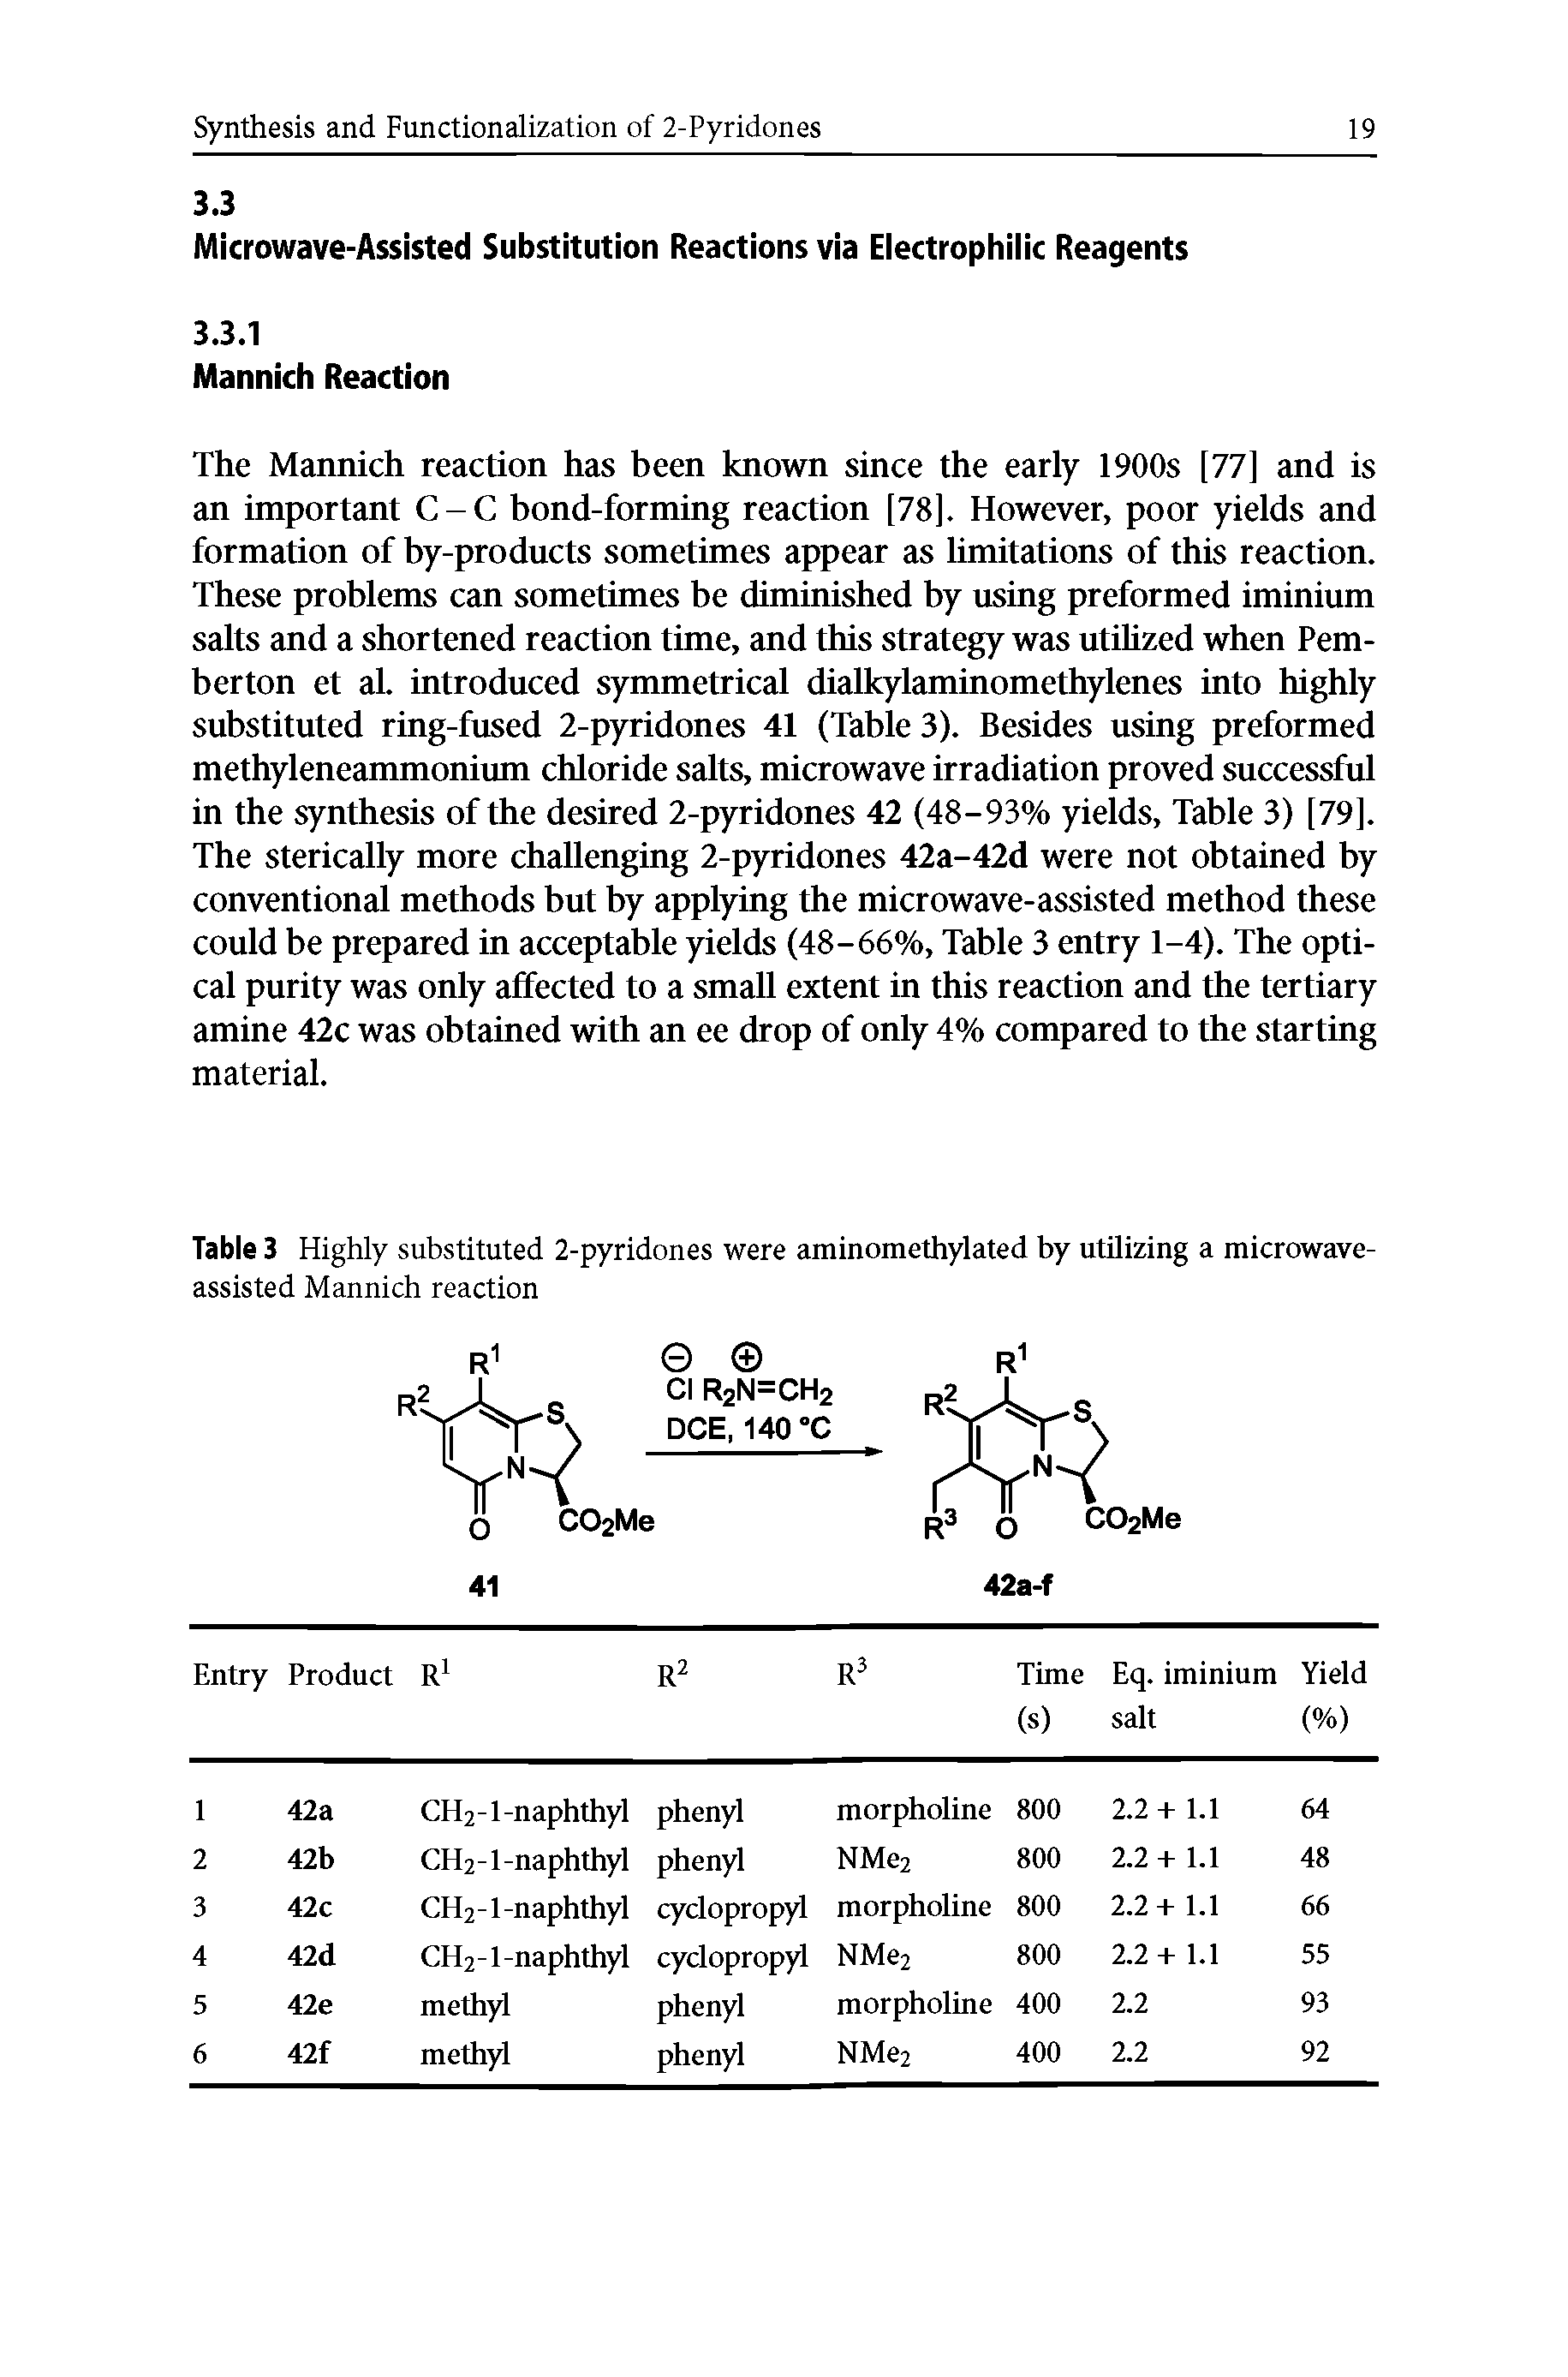 Table 3 Highly substituted 2-pyridones were aminomethylated by utilizing a microwave-assisted Mannich reaction...